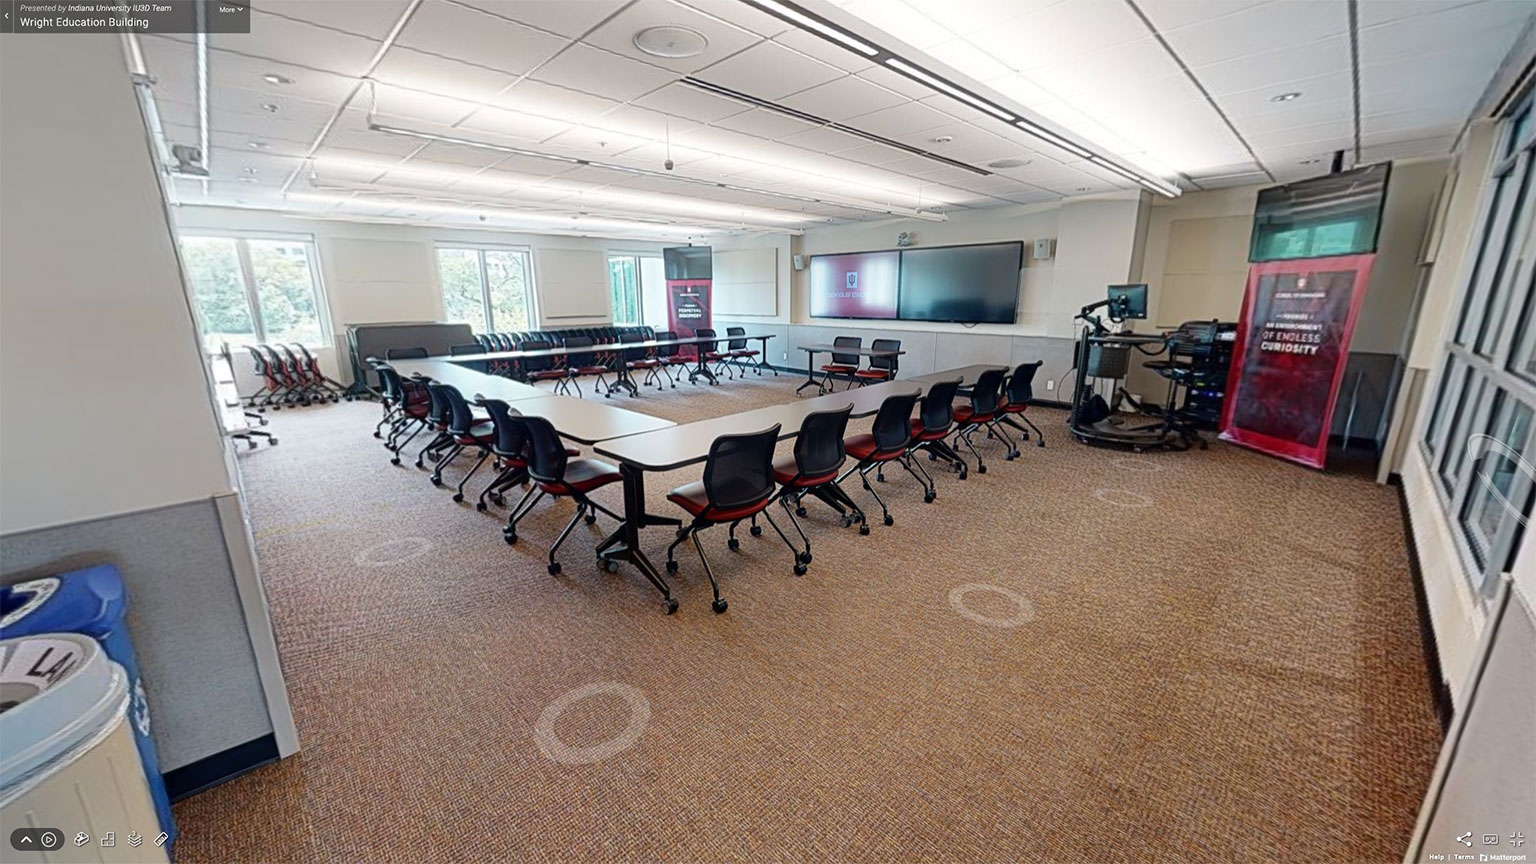 School of Education Conference Room